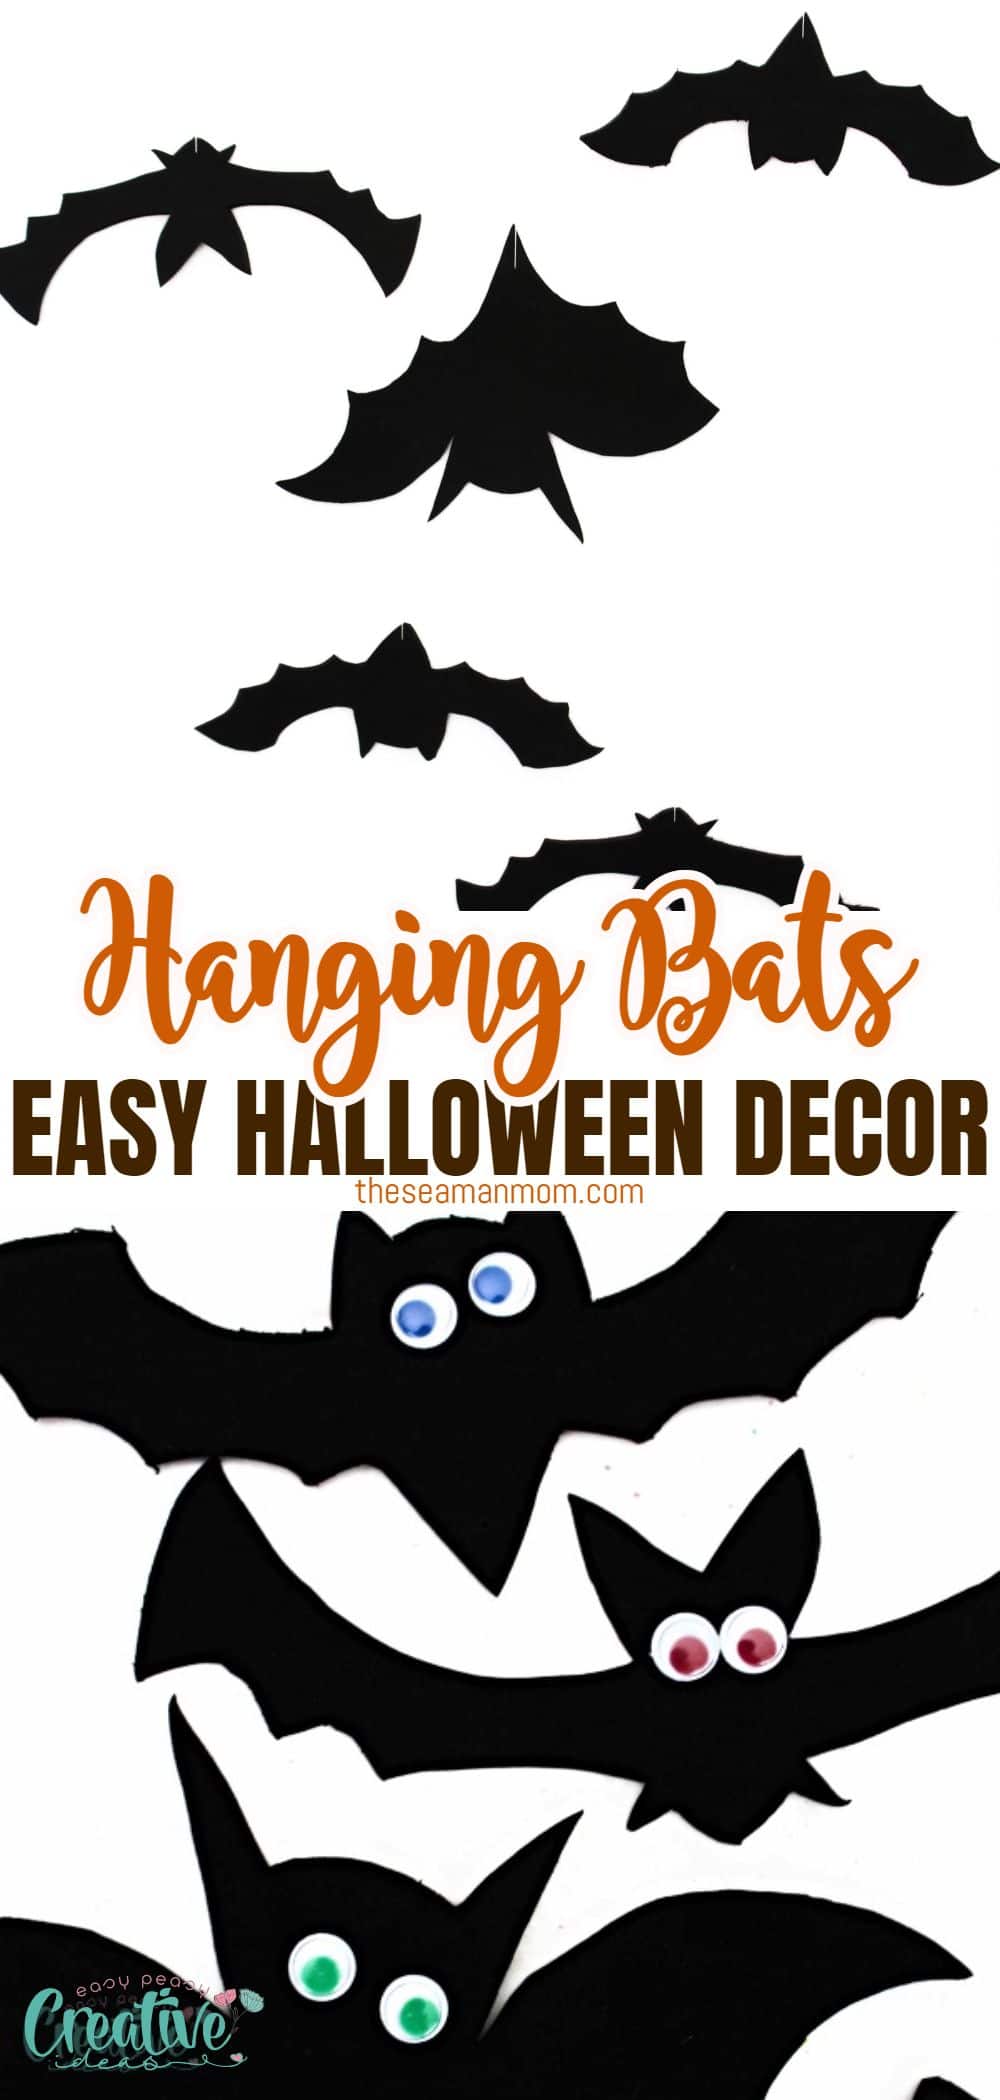 This Halloween, wow your guests and trick-or-treaters with some amazing hanging bat! This easy peasy Halloween bat decor is cute but spooky and frightfully fun enough to keep the kids excited about Halloween!  via @petroneagu